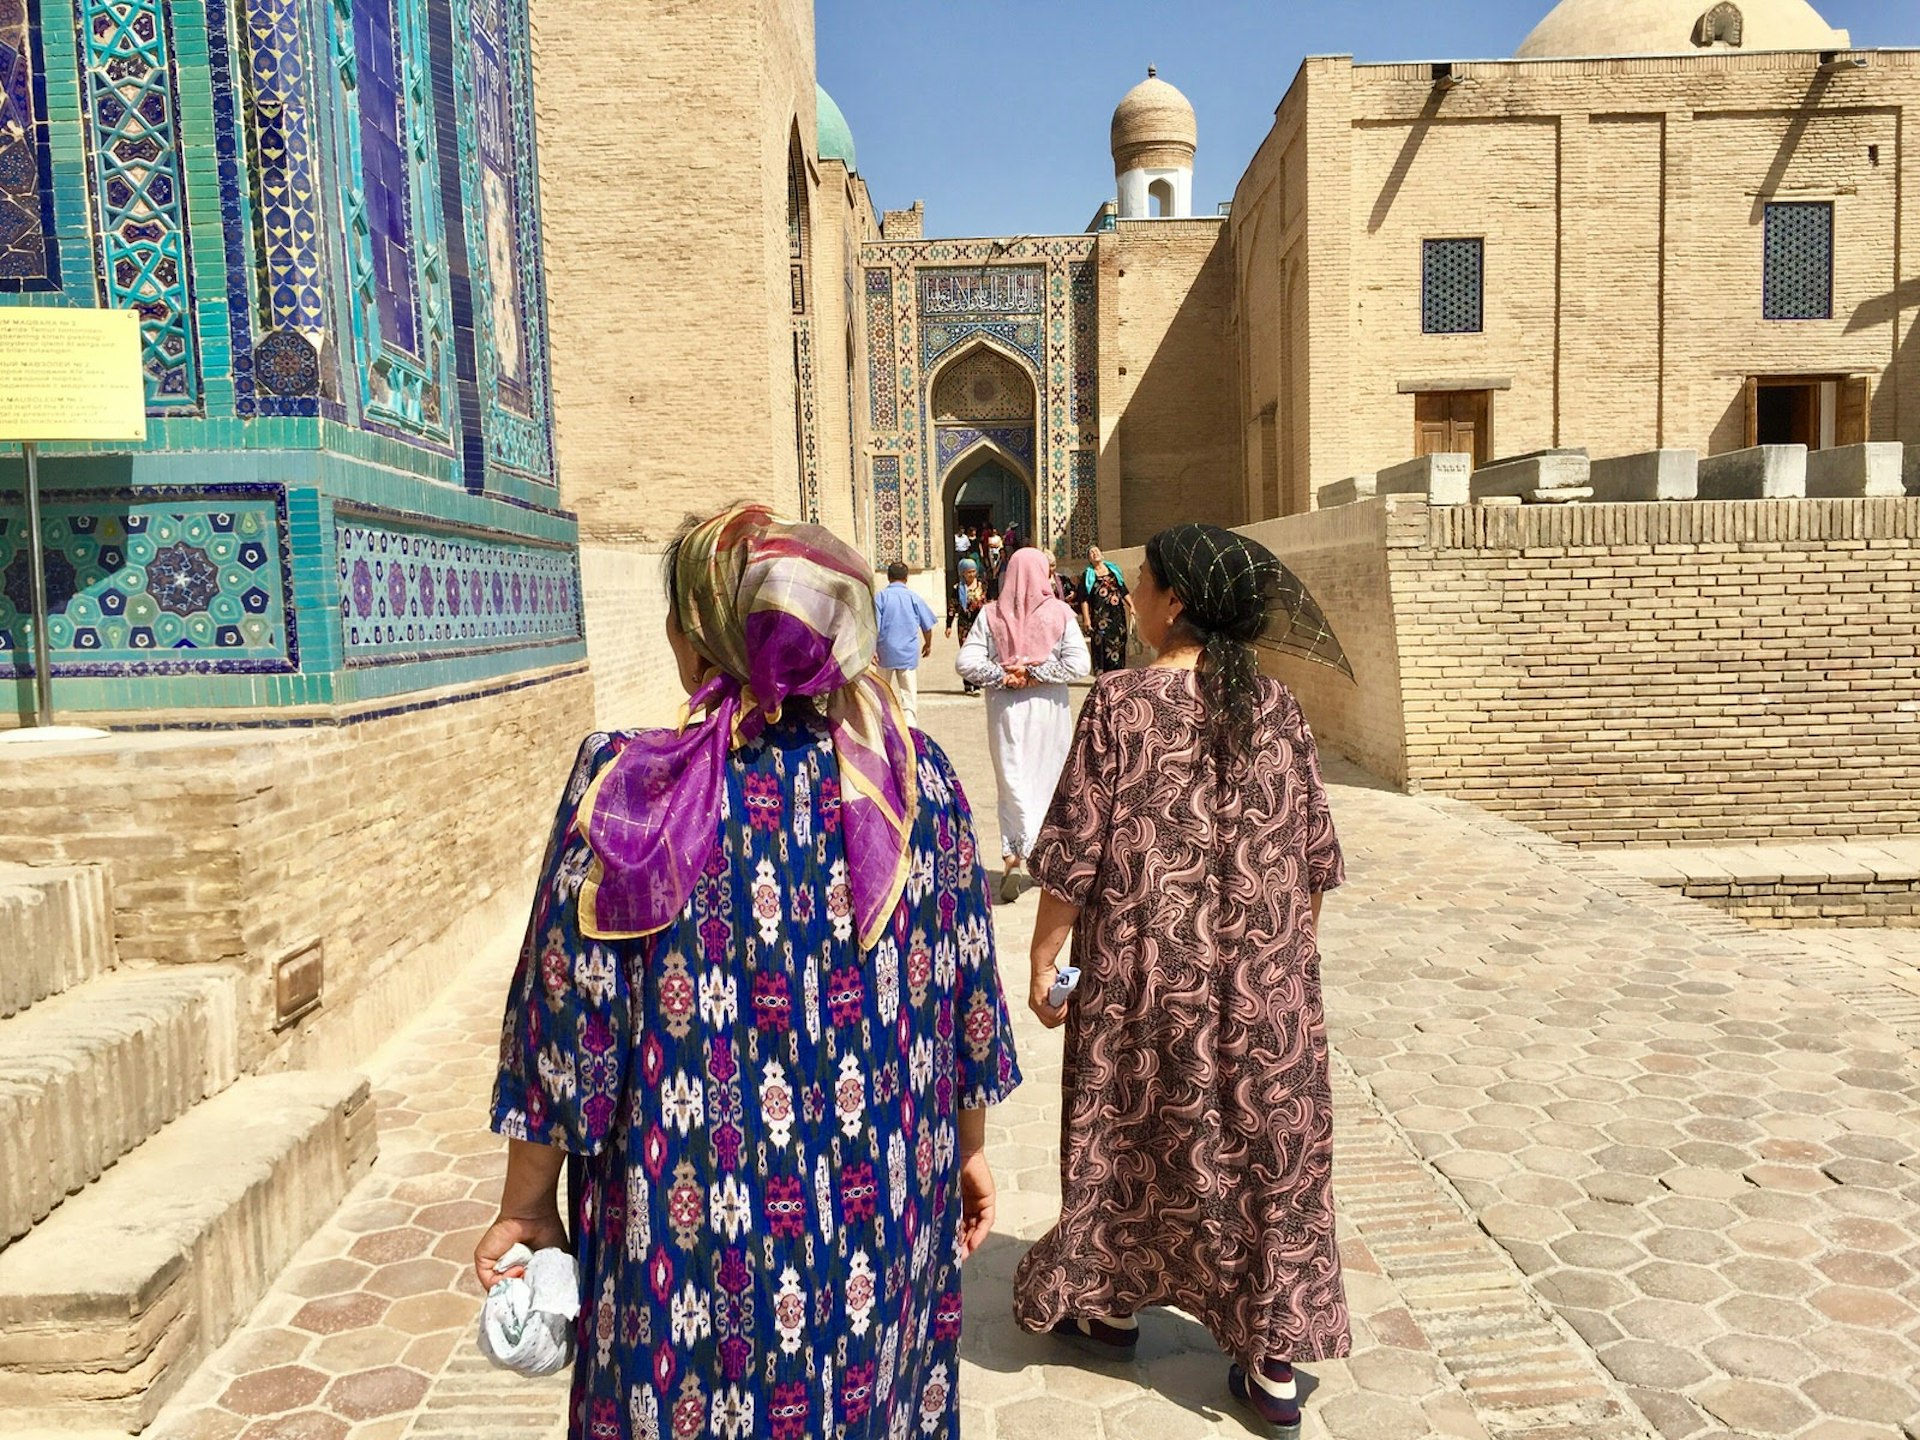 Ladies in bright clothing and head scarves walk through Shah-i-Zinda tiled mausoleum 